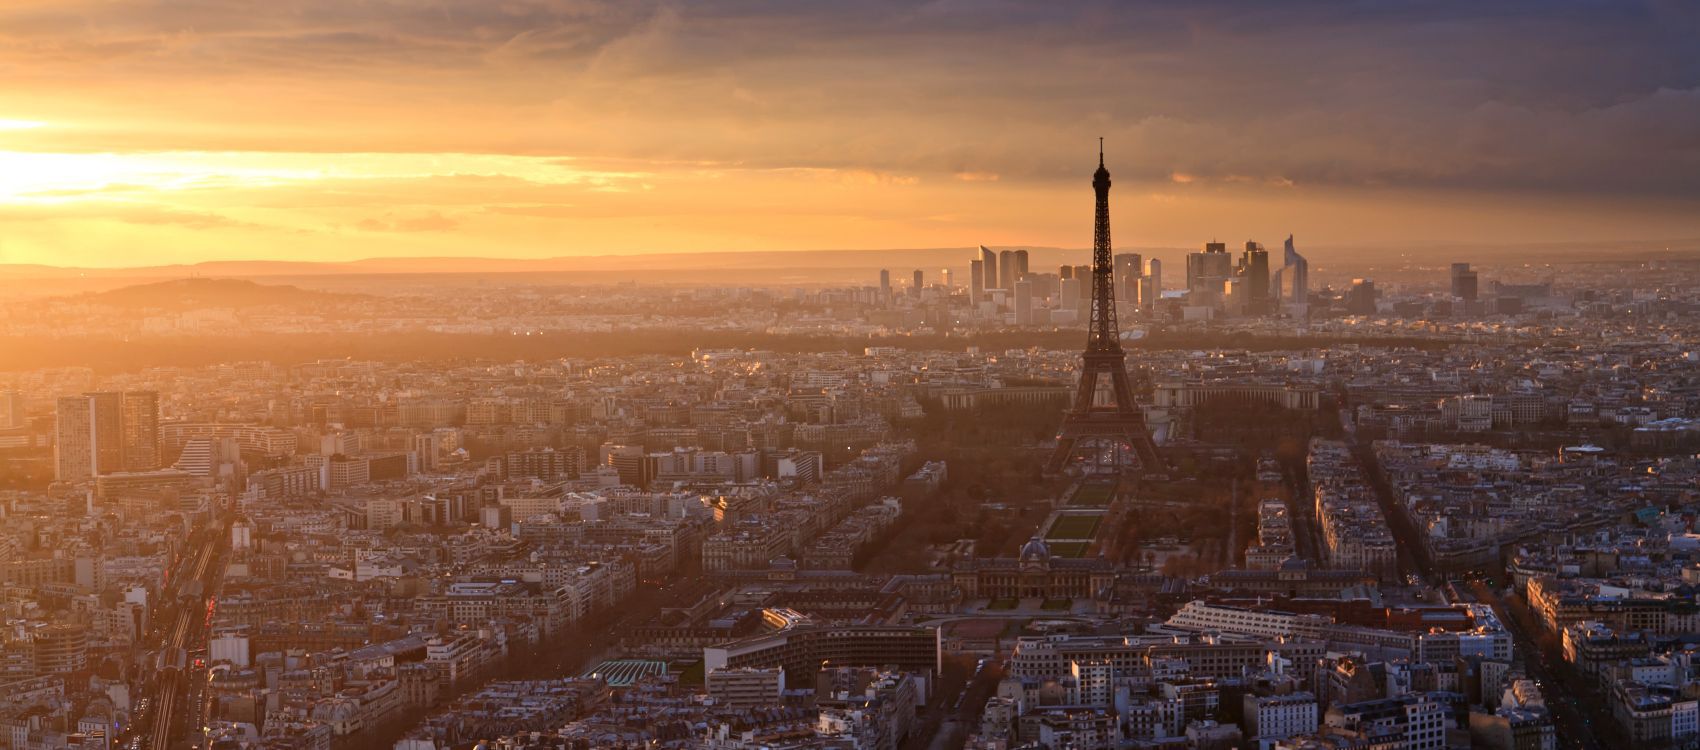 View of Paris with Eiffel Tower in foreground